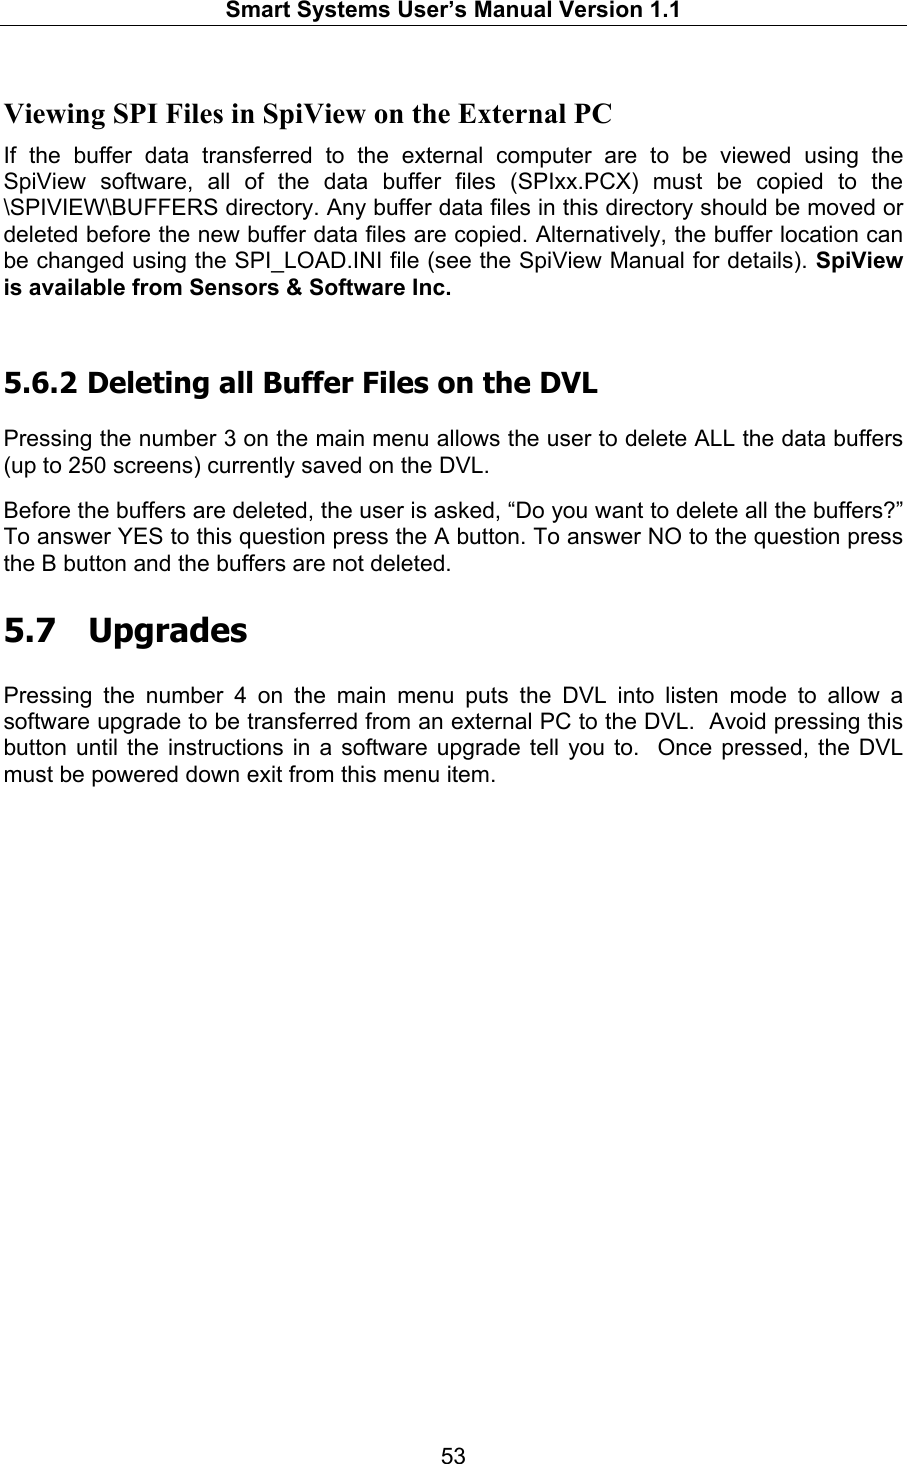   Smart Systems User’s Manual Version 1.1  53  Viewing SPI Files in SpiView on the External PC If the buffer data transferred to the external computer are to be viewed using the SpiView software, all of the data buffer files (SPIxx.PCX) must be copied to the \SPIVIEW\BUFFERS directory. Any buffer data files in this directory should be moved or deleted before the new buffer data files are copied. Alternatively, the buffer location can be changed using the SPI_LOAD.INI file (see the SpiView Manual for details). SpiView is available from Sensors &amp; Software Inc.  5.6.2  Deleting all Buffer Files on the DVL  Pressing the number 3 on the main menu allows the user to delete ALL the data buffers (up to 250 screens) currently saved on the DVL.   Before the buffers are deleted, the user is asked, “Do you want to delete all the buffers?” To answer YES to this question press the A button. To answer NO to the question press the B button and the buffers are not deleted.  5.7  Upgrades  Pressing the number 4 on the main menu puts the DVL into listen mode to allow a software upgrade to be transferred from an external PC to the DVL.  Avoid pressing this button until the instructions in a software upgrade tell you to.  Once pressed, the DVL must be powered down exit from this menu item.   